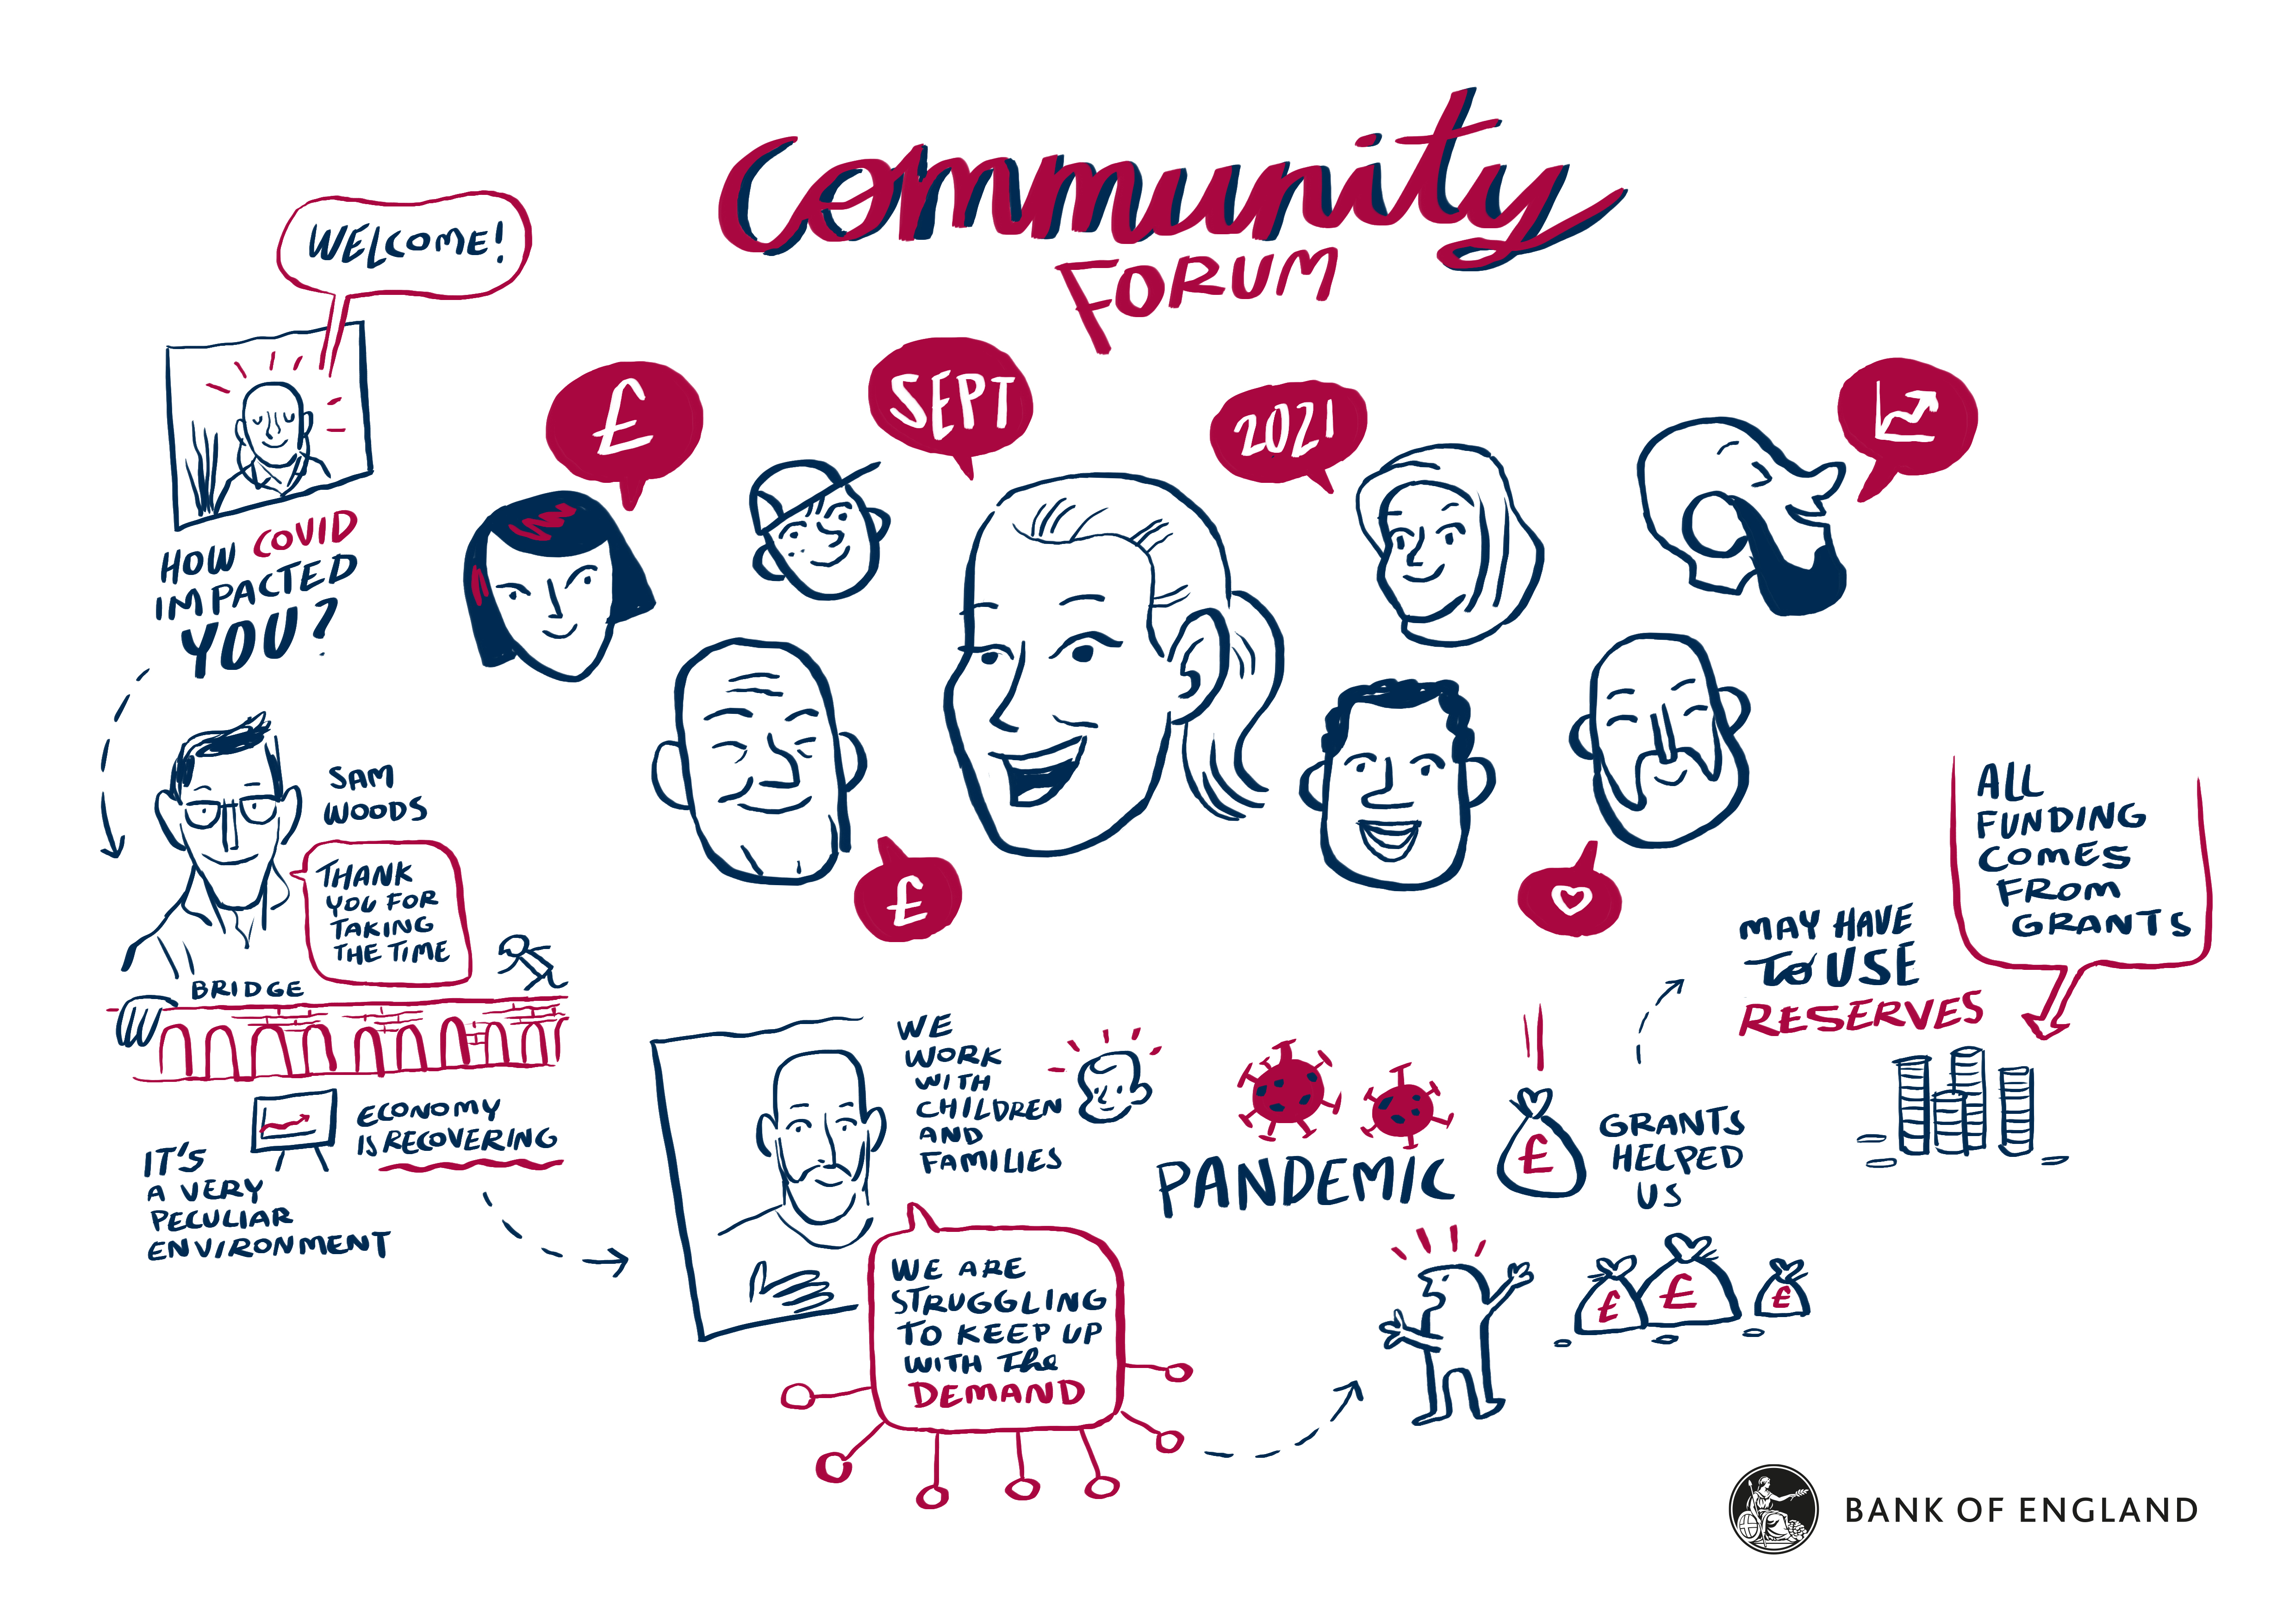 Visual artistic scribe depicting the community